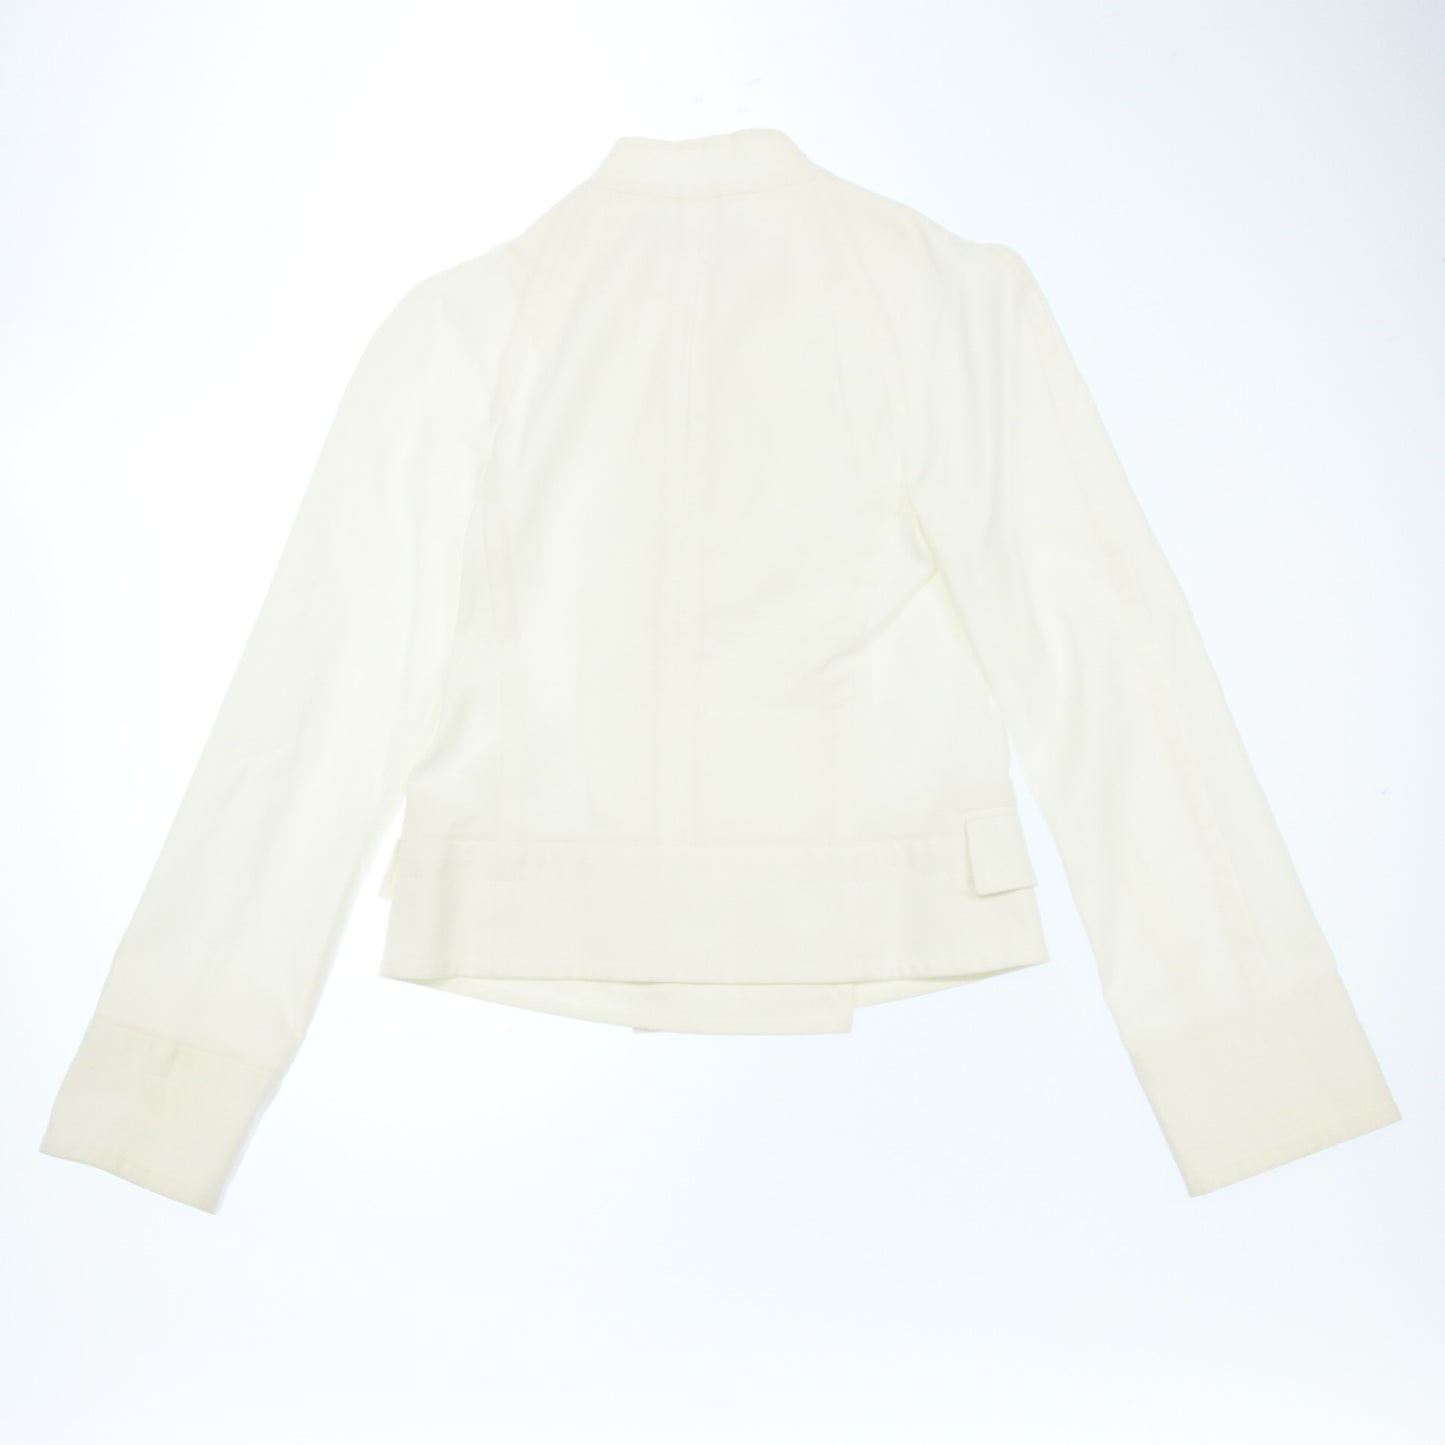 Good Condition◆Dolce &amp; Gabbana Double Jacket Silver Button Women's White Size 38 DOLCE &amp; GABBANA [AFB18] 